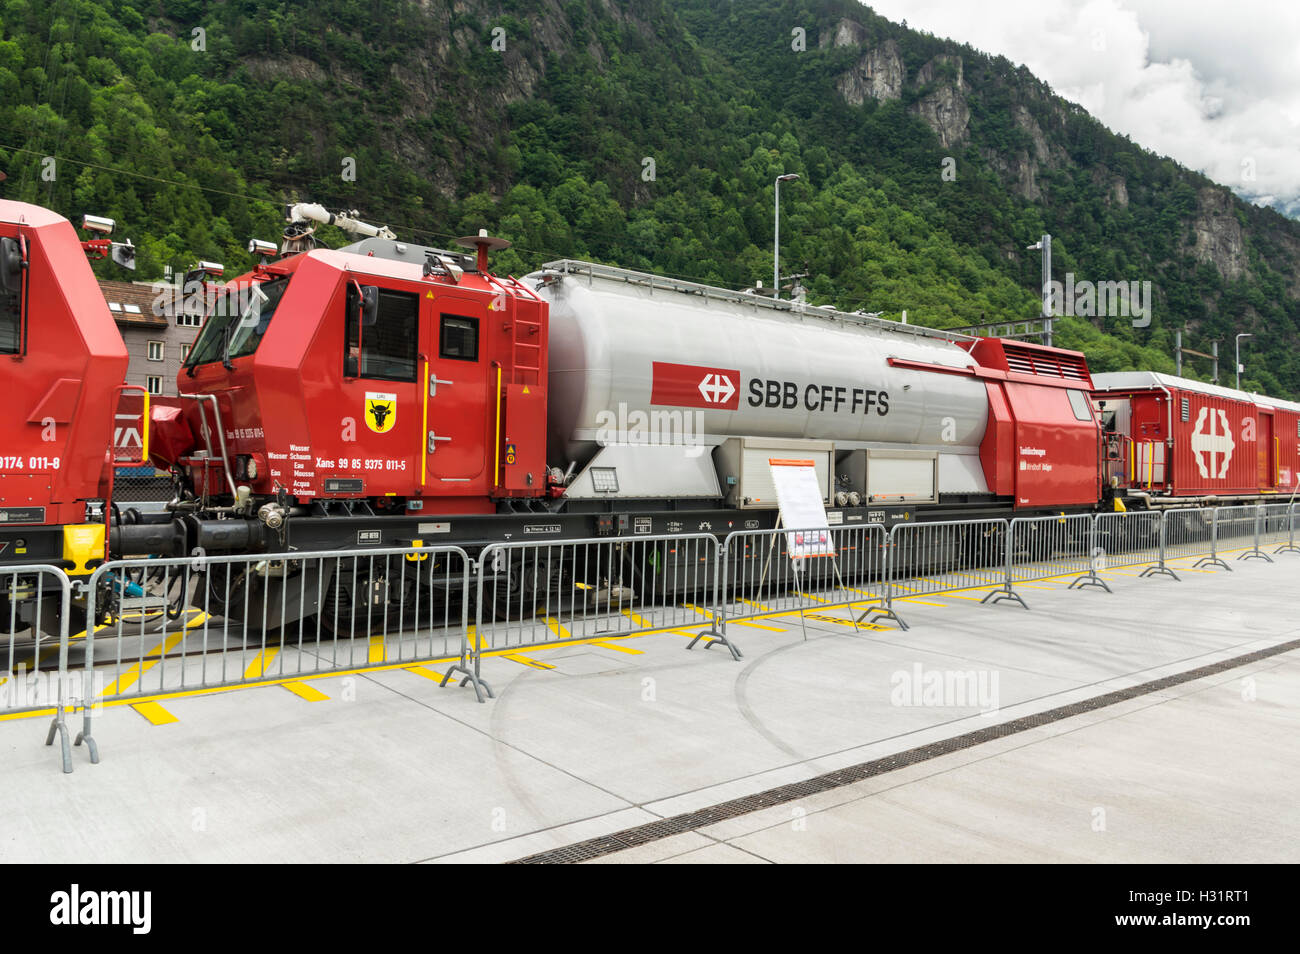 Tank wagon of the firefighting and rescue train LRZ 14, based on a Windhoff MPV. Operated by SBB, the Swiss Federal Railways. Stock Photo